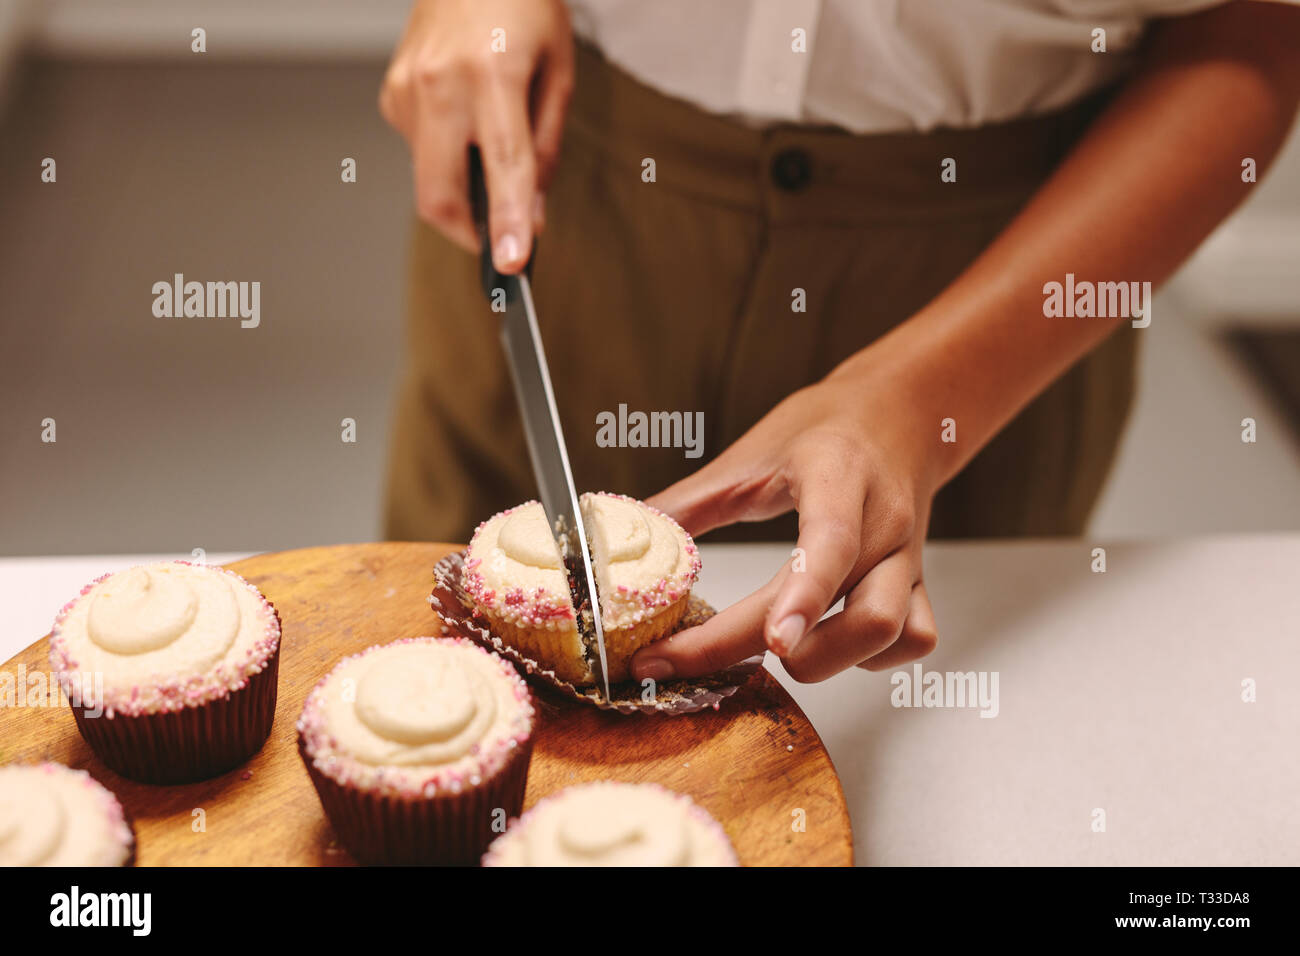 Close up of pastry chef cutting a homemade cupcake on wooden board with knife. Woman confectioner preparing muffins in the kitchen. Stock Photo